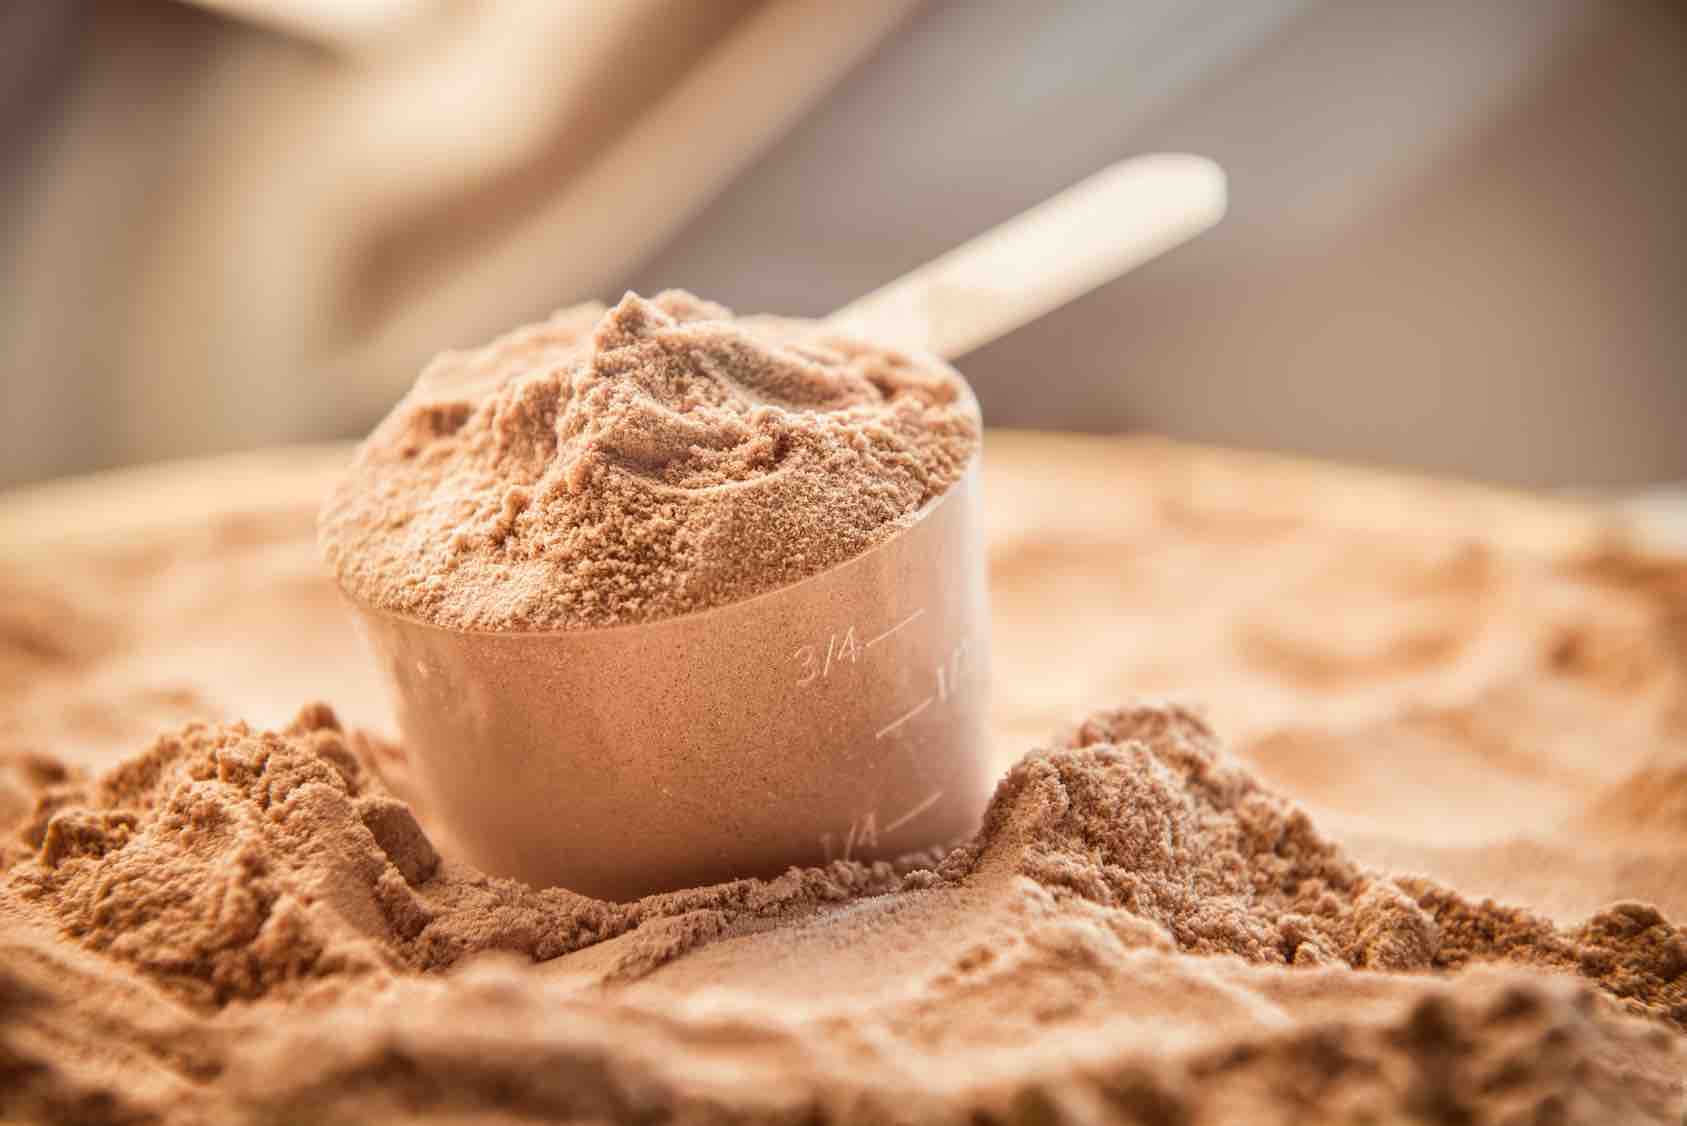 Image of a scoop of chocolate protein powder